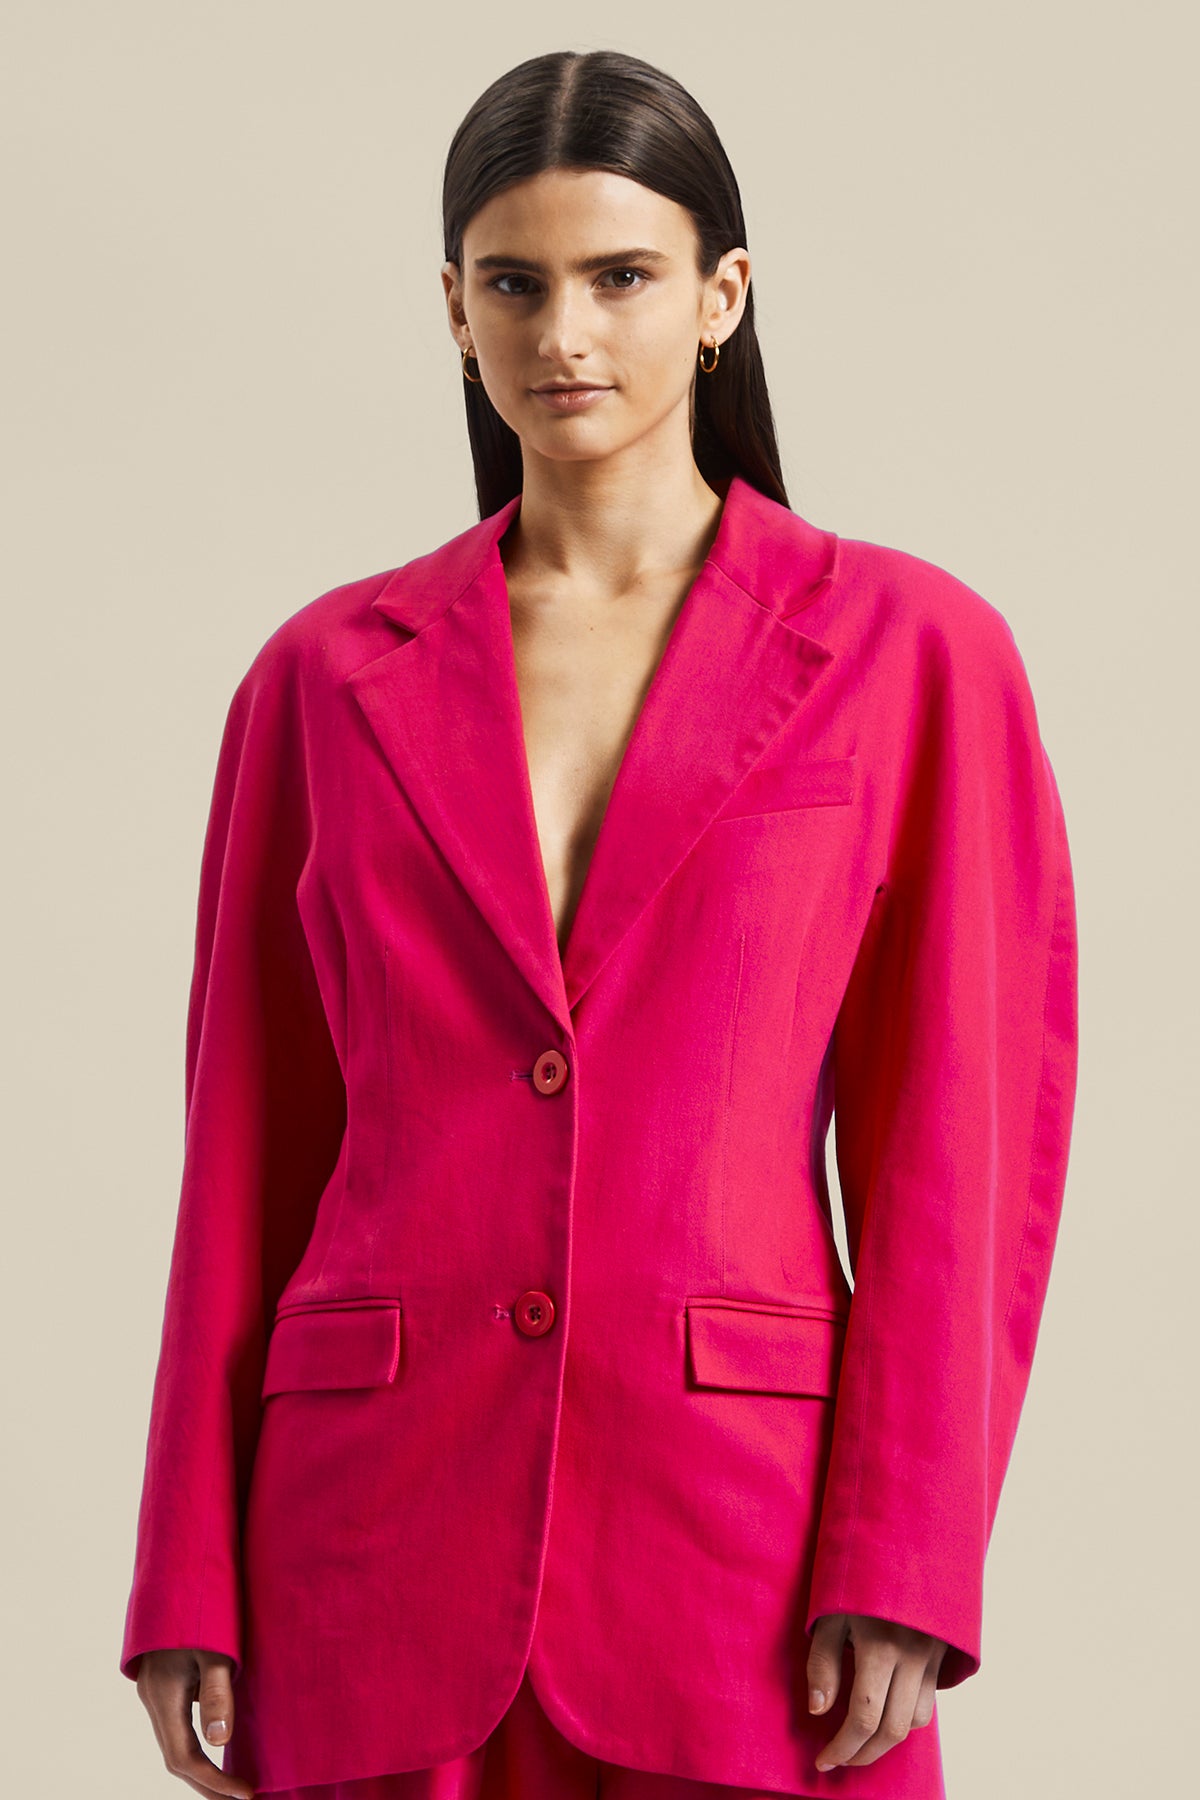 Model wearing the pink Novelist Jacket from Australian fashion designer GINGER & SMART featuring, tailored structural cut and oversized shape. Worn with the pink Novelist Pant.